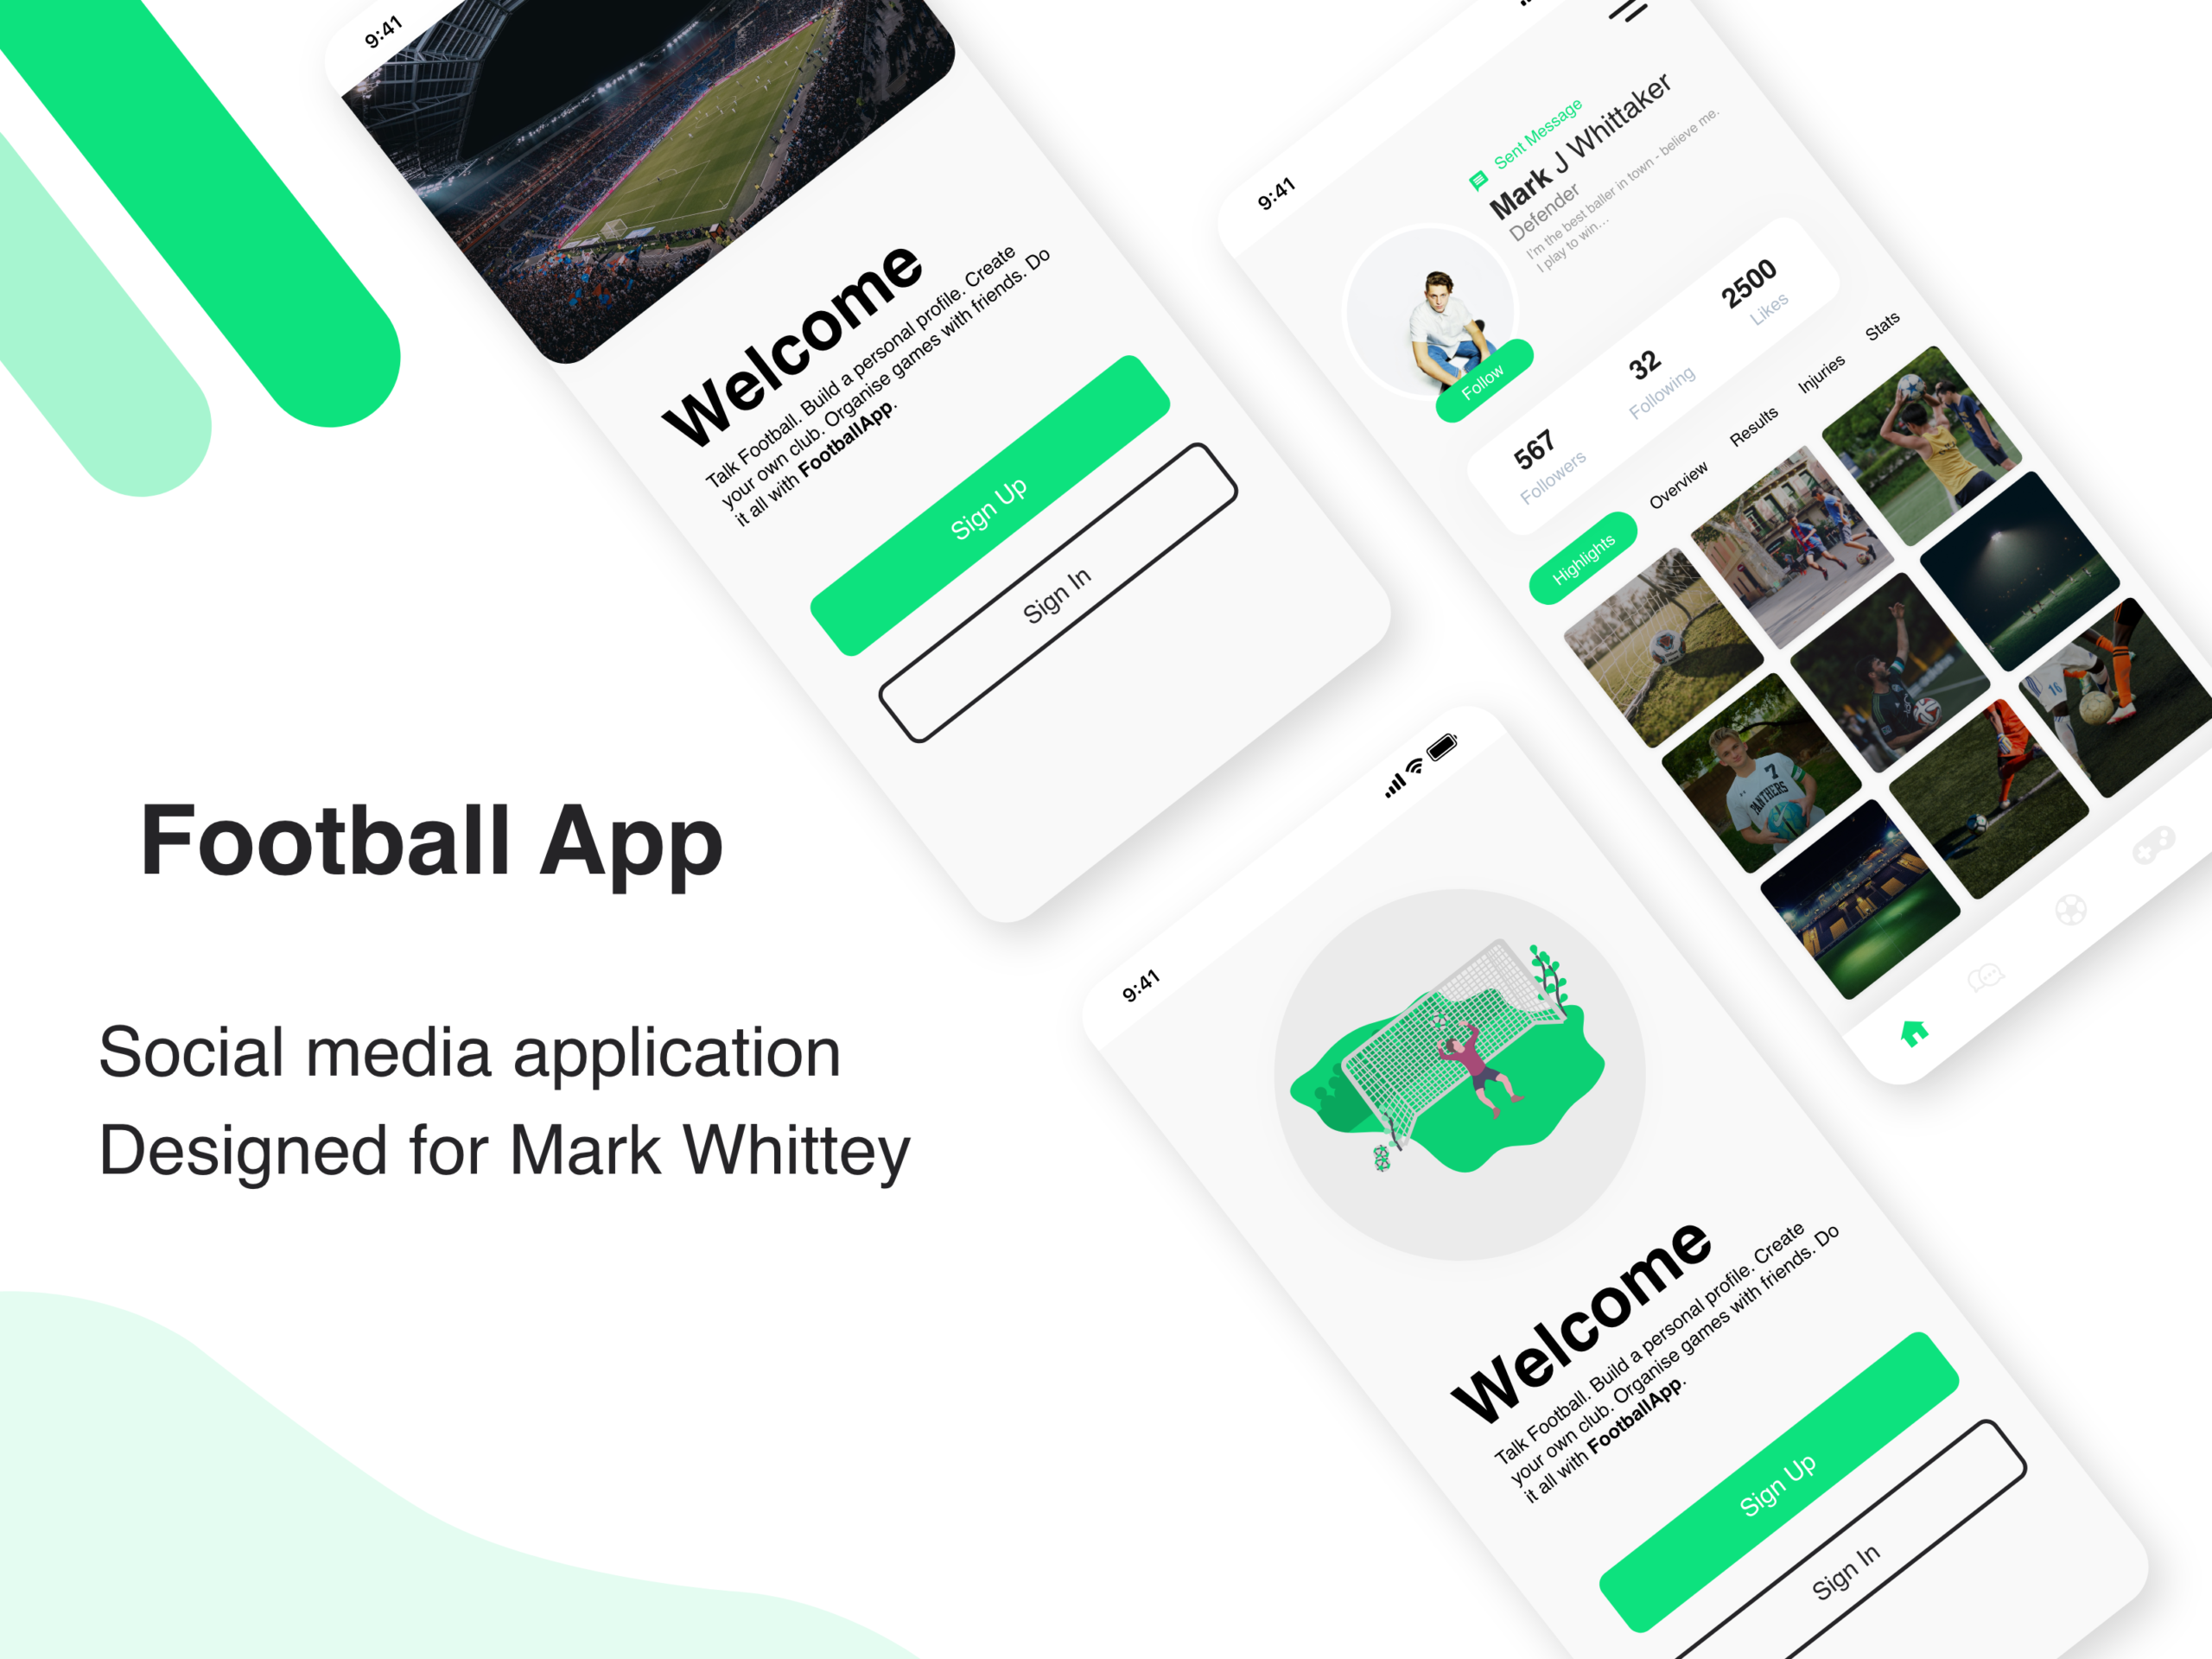 Football App Wireframe made by iMakeable